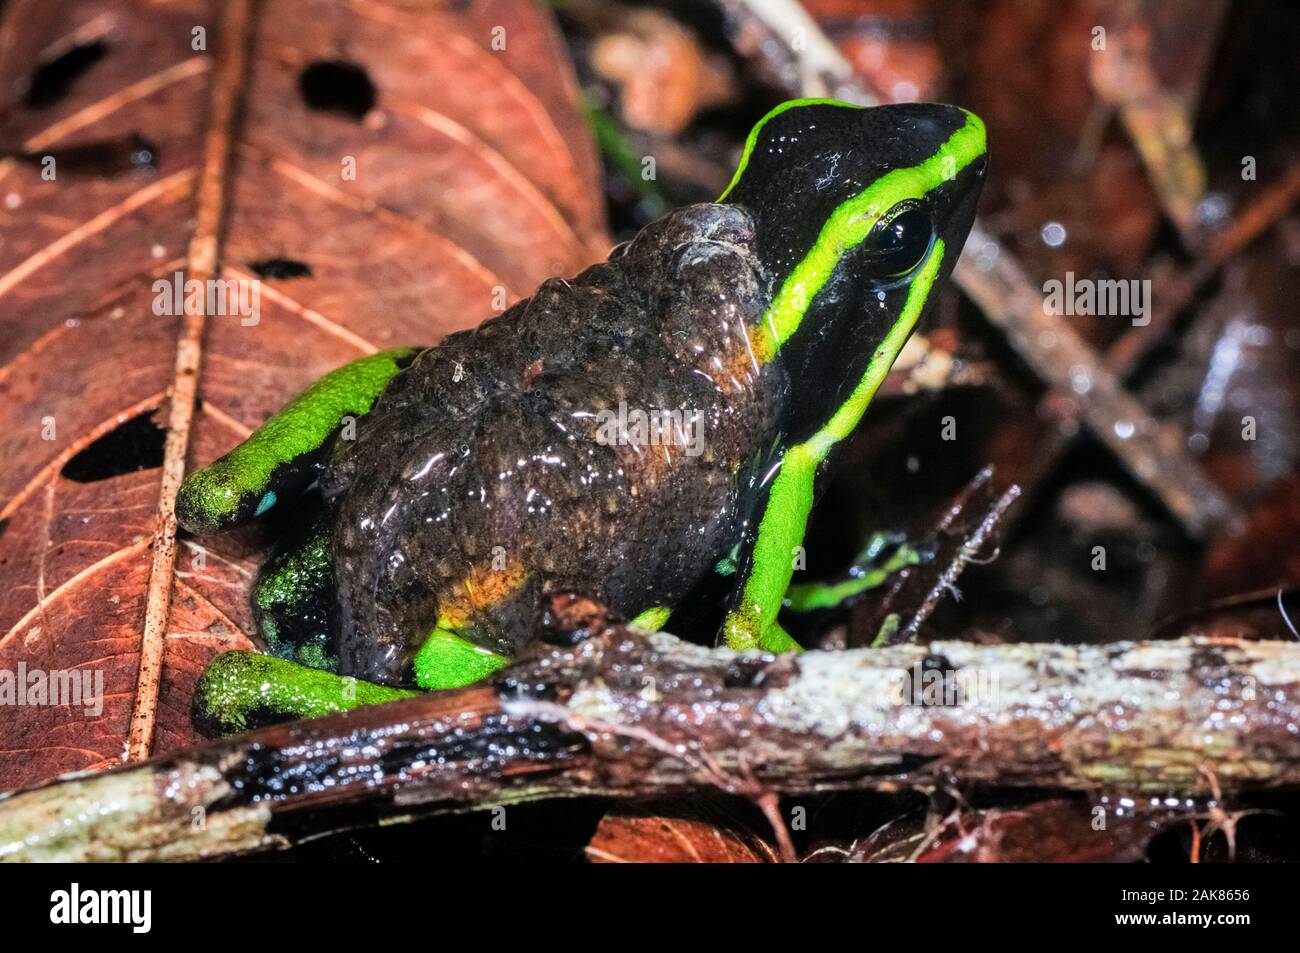 three-striped poison dart frog, Ameerega trivittata, adult male, guarding and carrying tadpoles on its back, Tambopata National Reserve, Madre de Dios Stock Photo